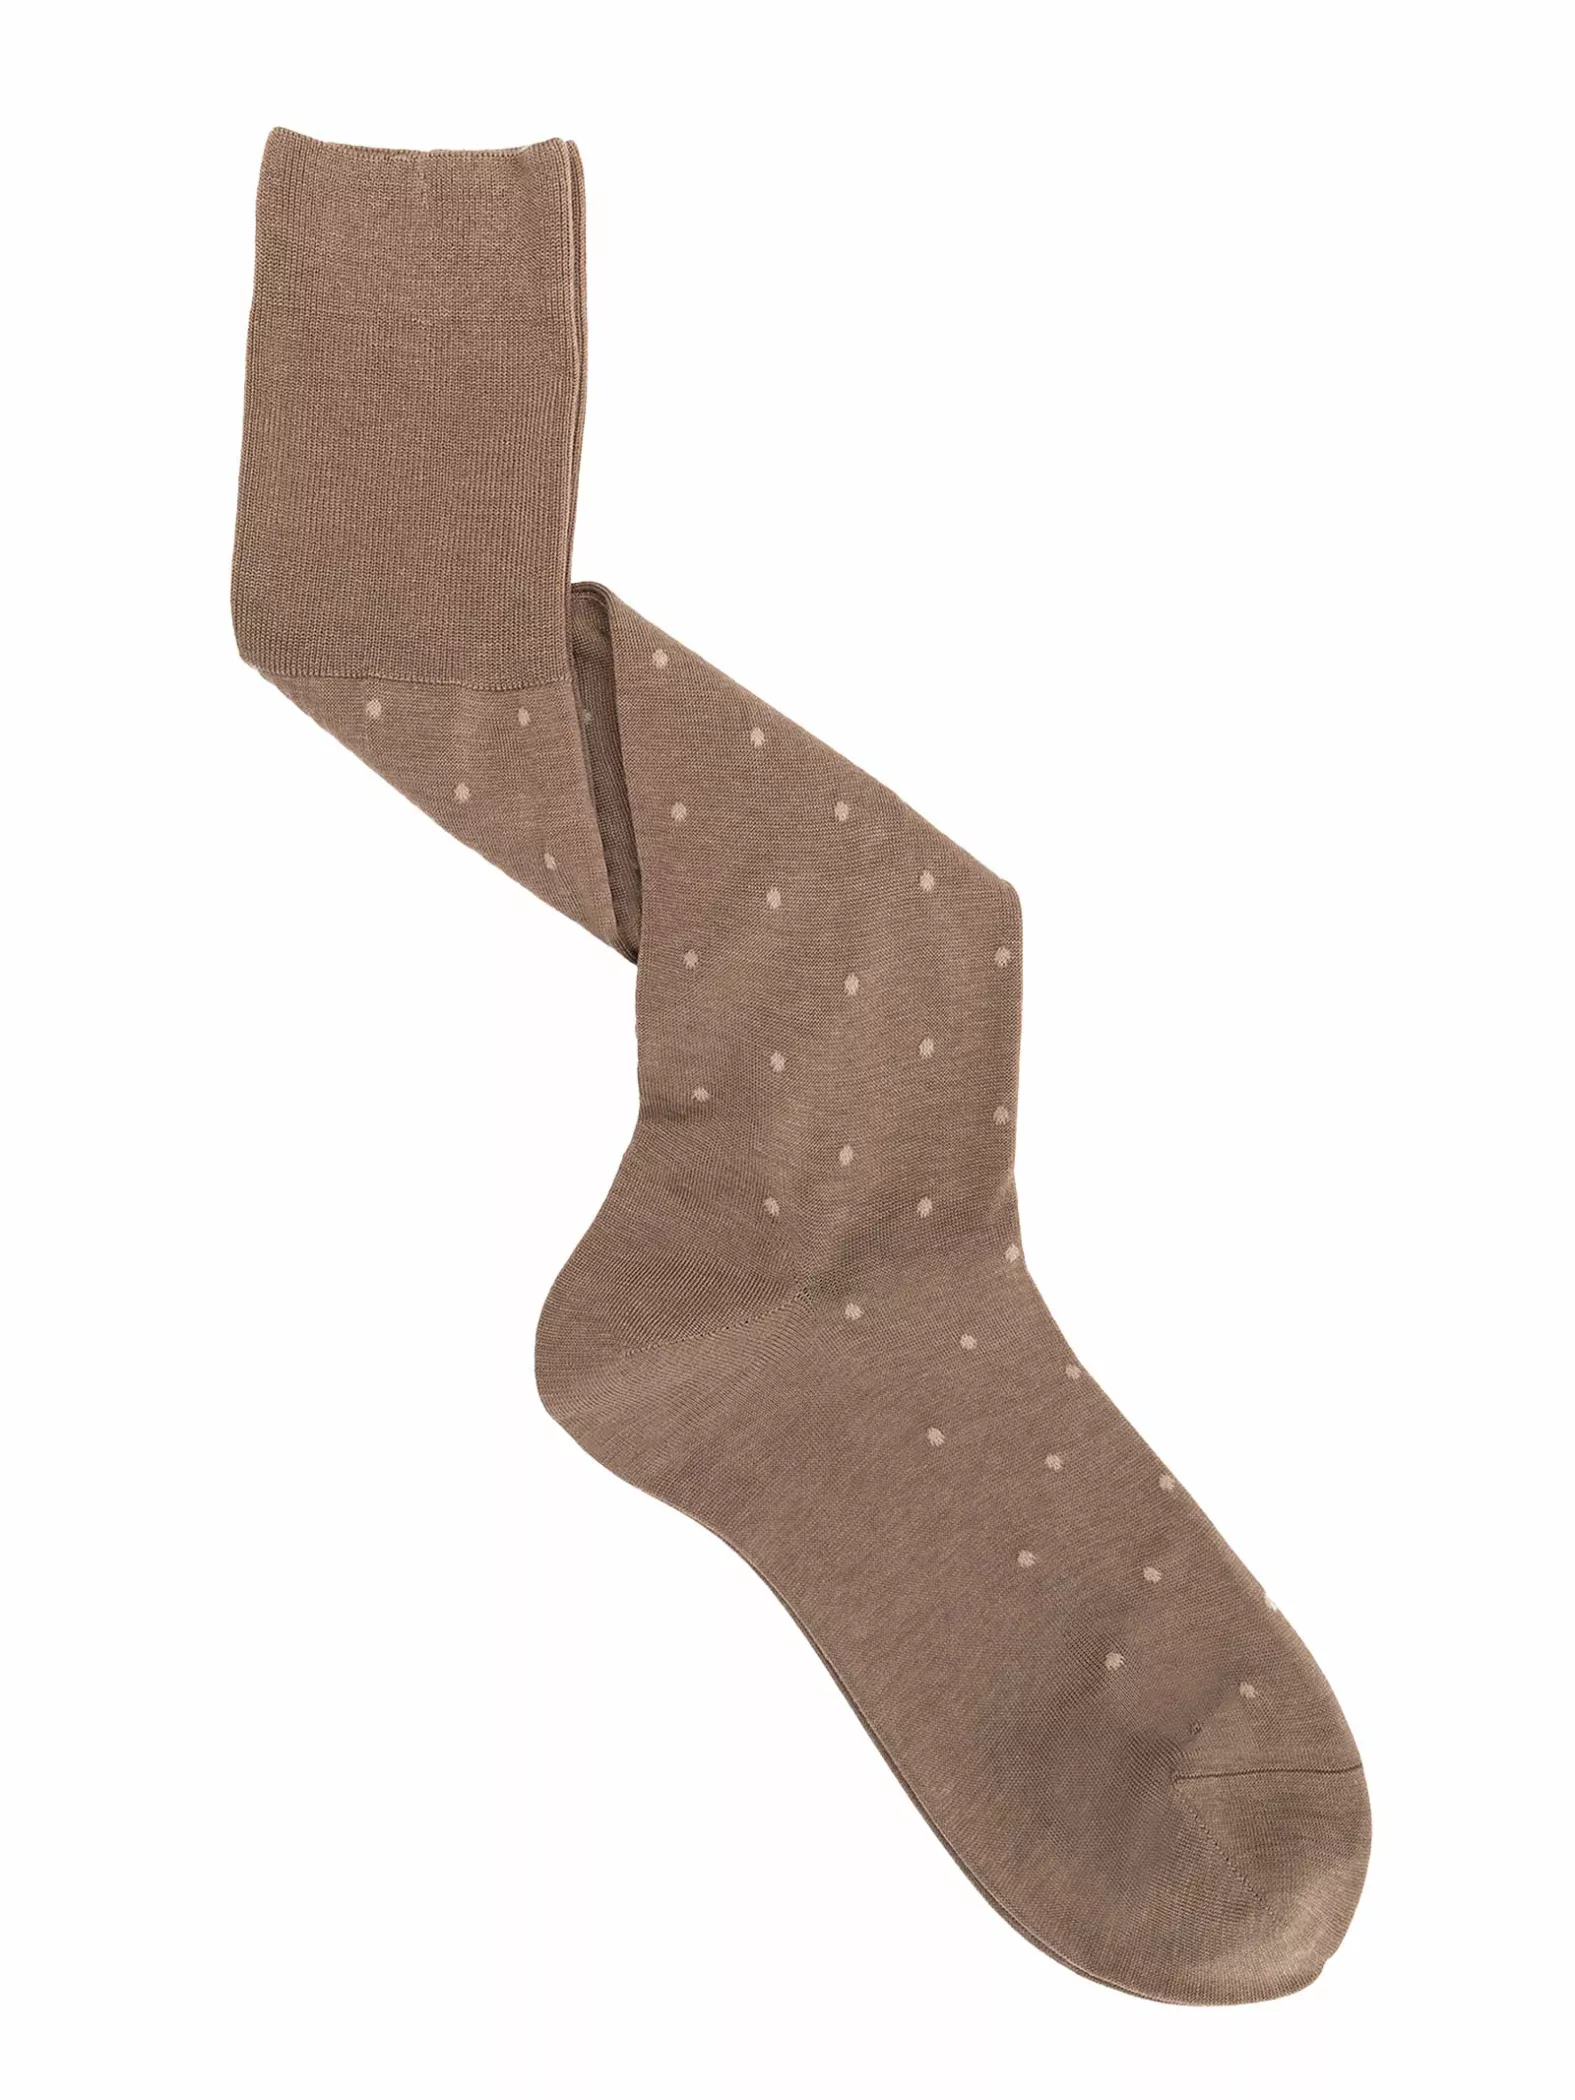 Refined Knee High Socks in Fresh Cotton with Polka Dot Pattern